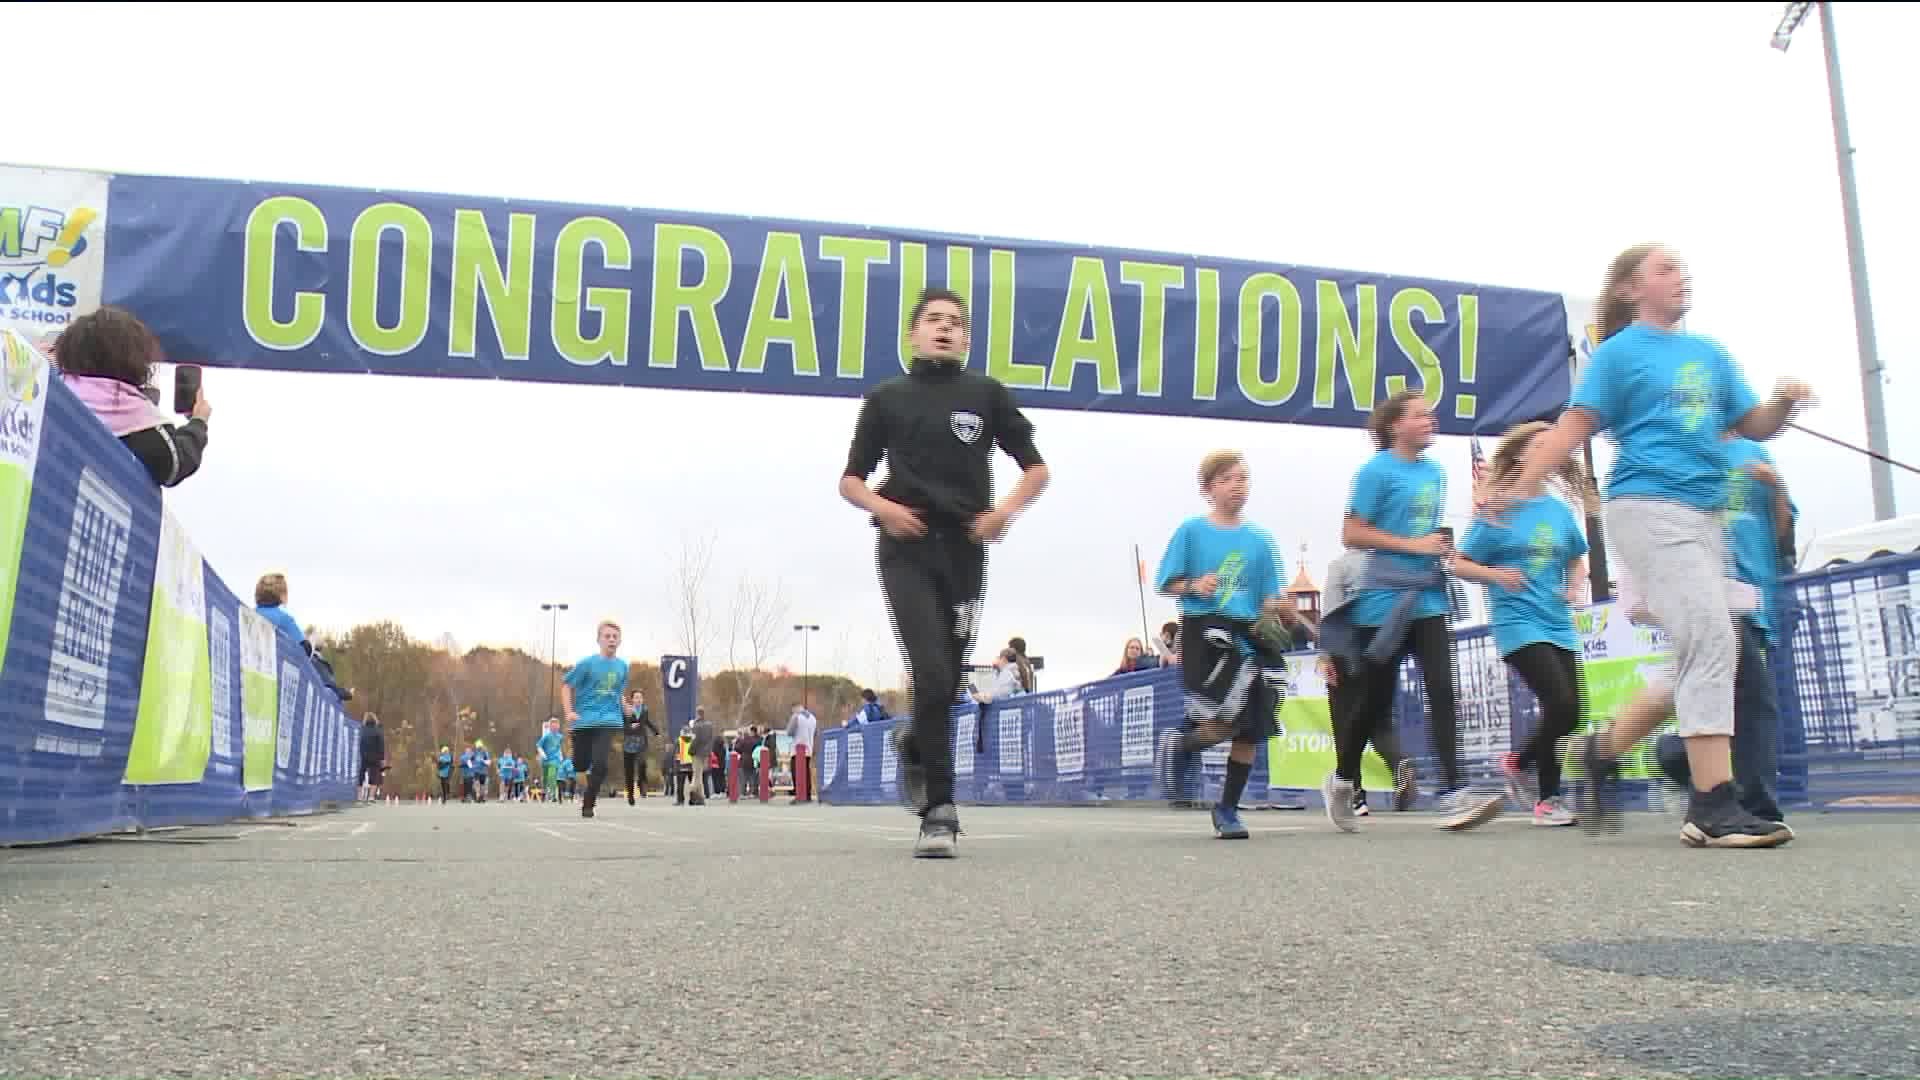 More than 1,000 students across CT complete marathon over 6 weeks